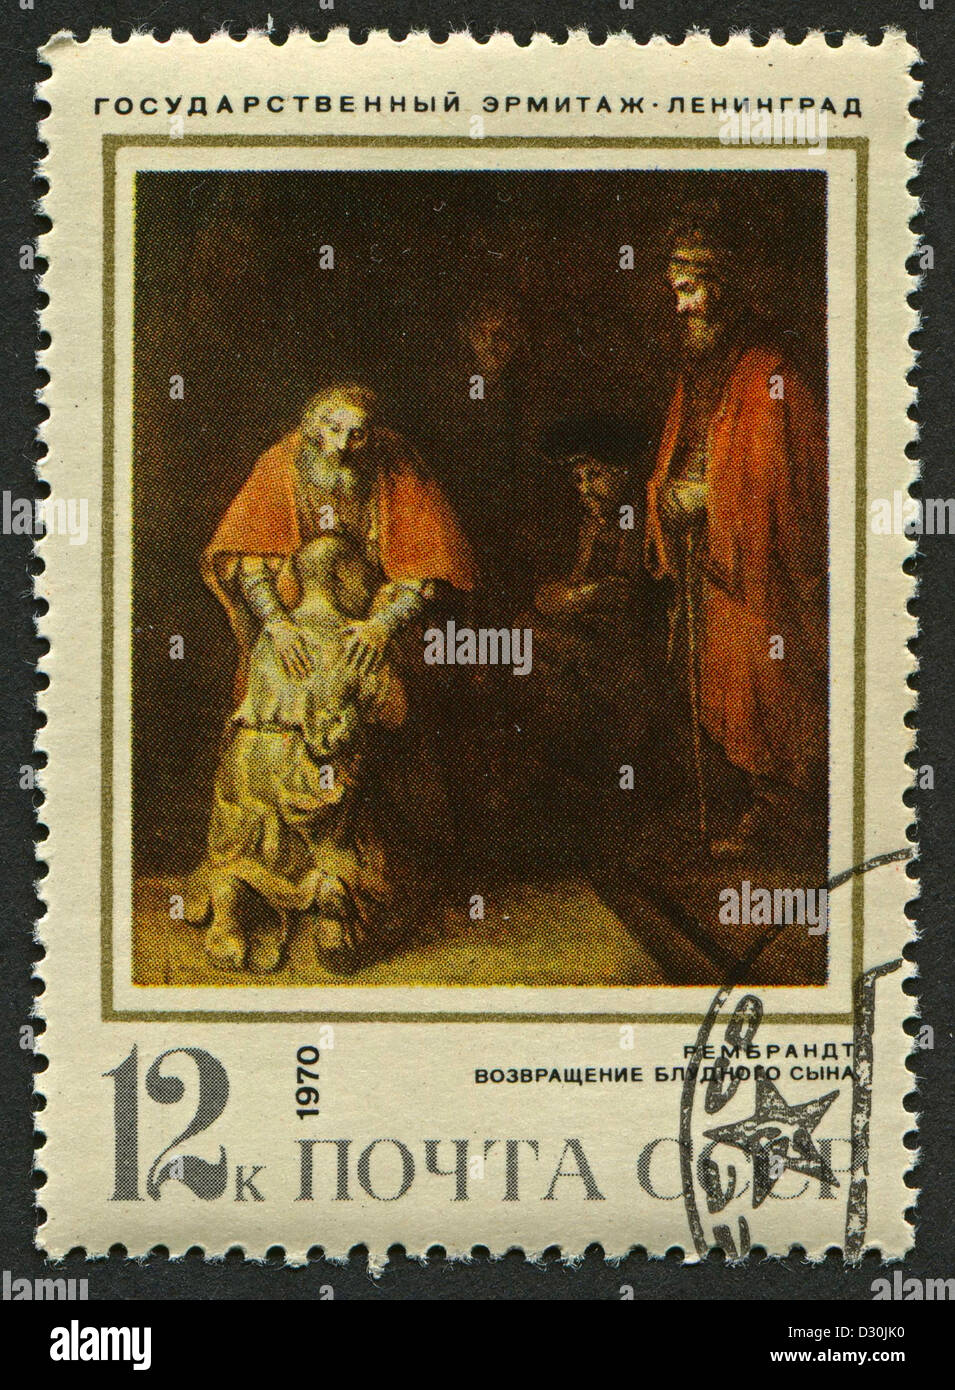 USSR - CIRCA 1970: A stamp printed in USSR shows an oil painting 'The Return of the Prodigal Son' by Rembrandt, circa 1970.  Stock Photo